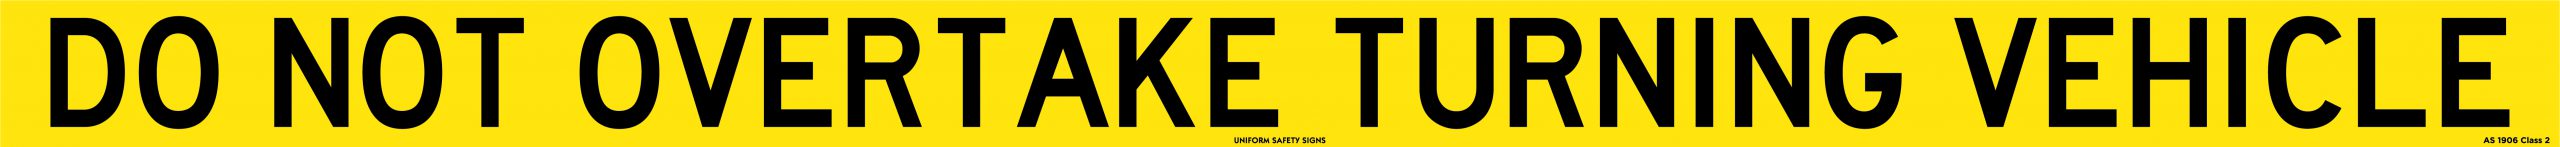 UNIFORM SAFETY 1310X75MM SELF ADH CL2 DO NOT OVERTAKE TURNING VEHICLE